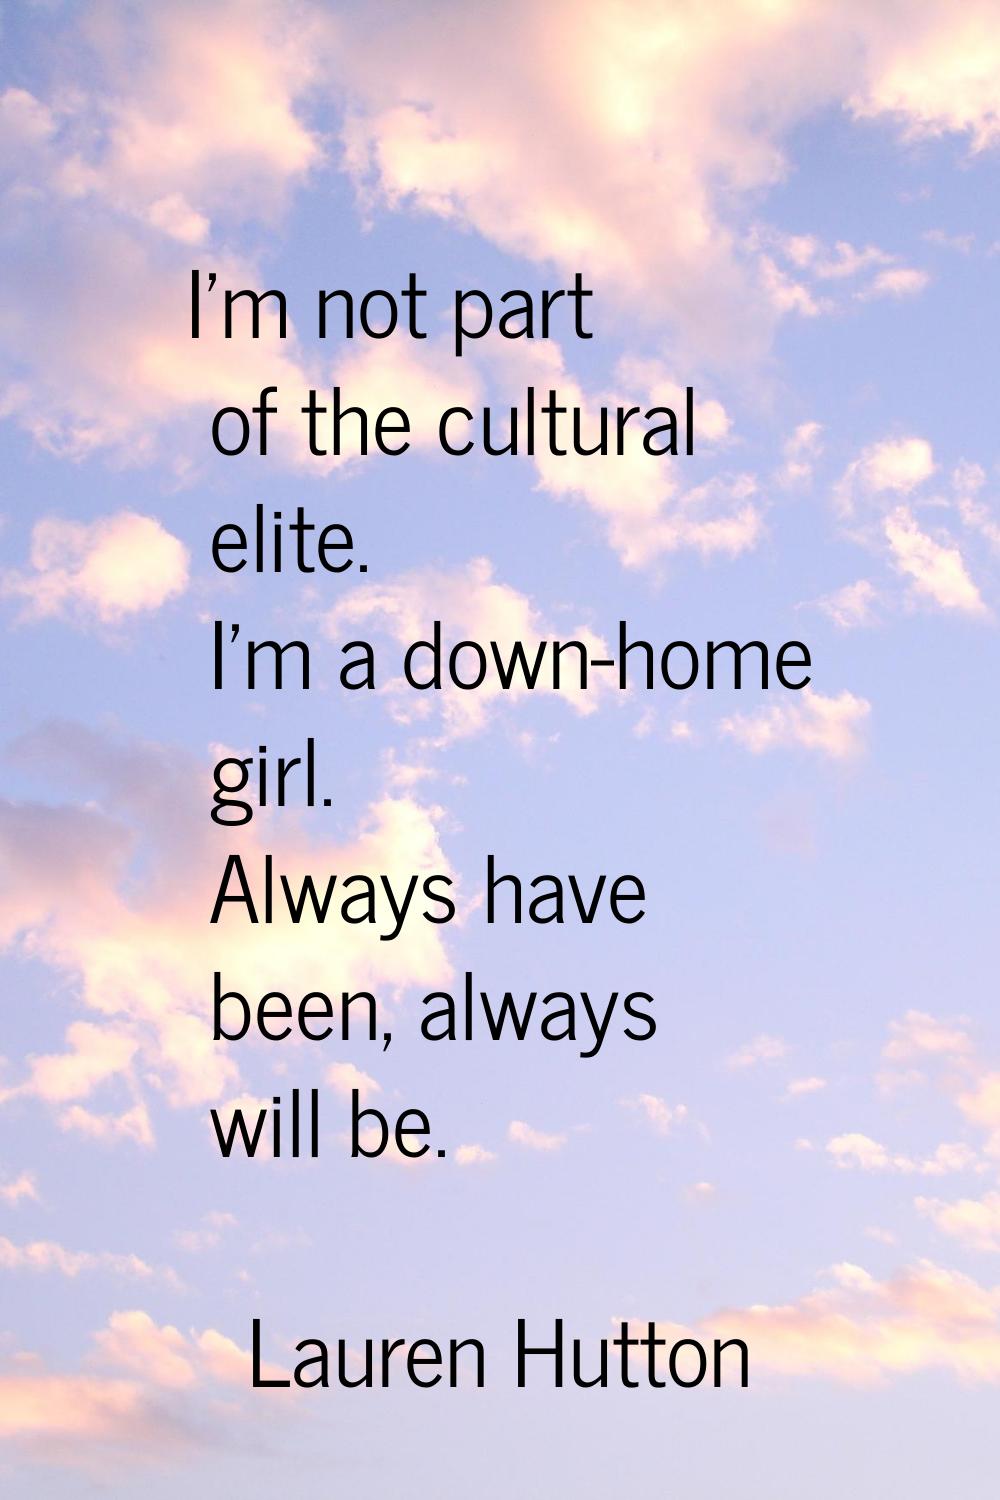 I'm not part of the cultural elite. I'm a down-home girl. Always have been, always will be.